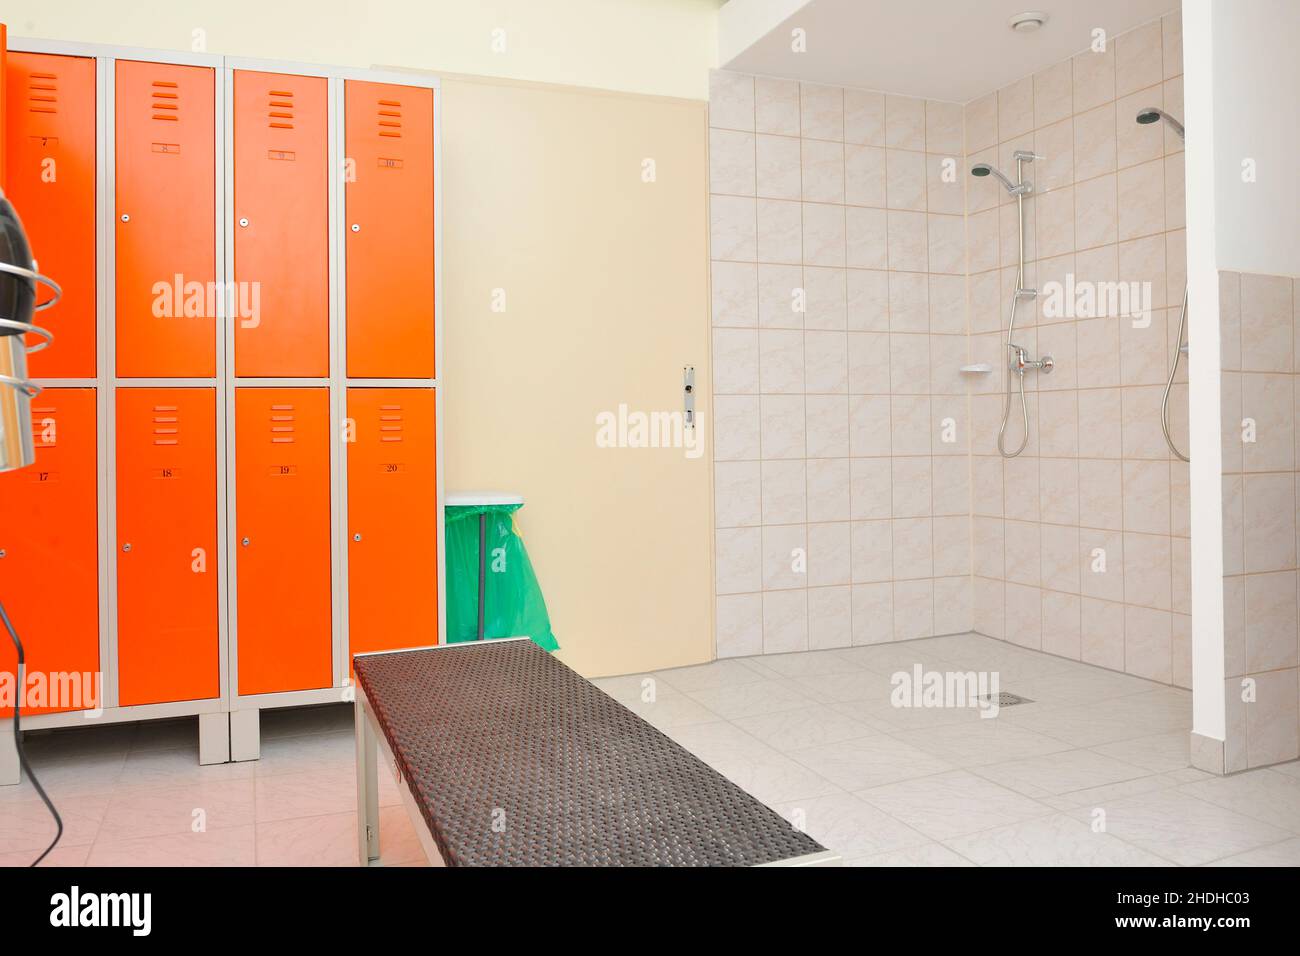 gym, changing room, fitness club, fitness clubs, gyms, changing rooms, dressing room, dressing rooms, fitting rooms Stock Photo